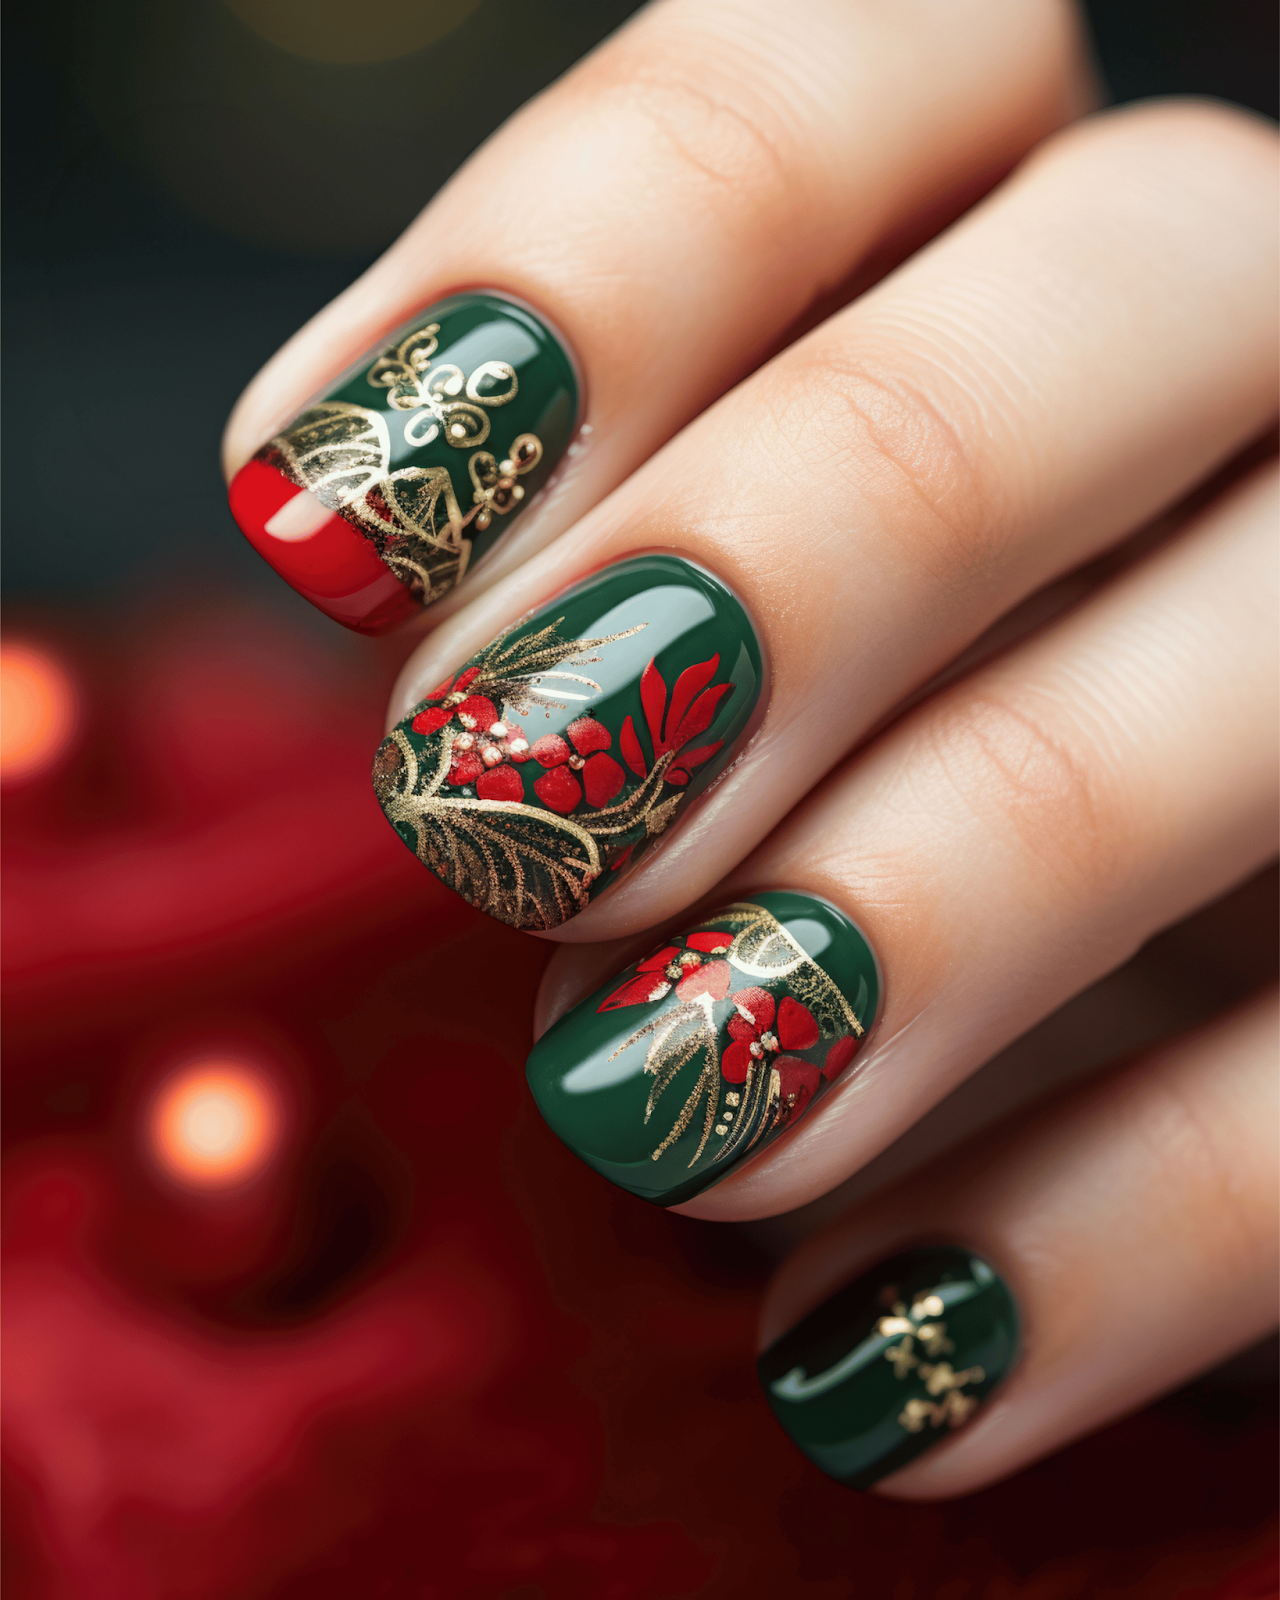 Green nails with a Christmas design of red holly